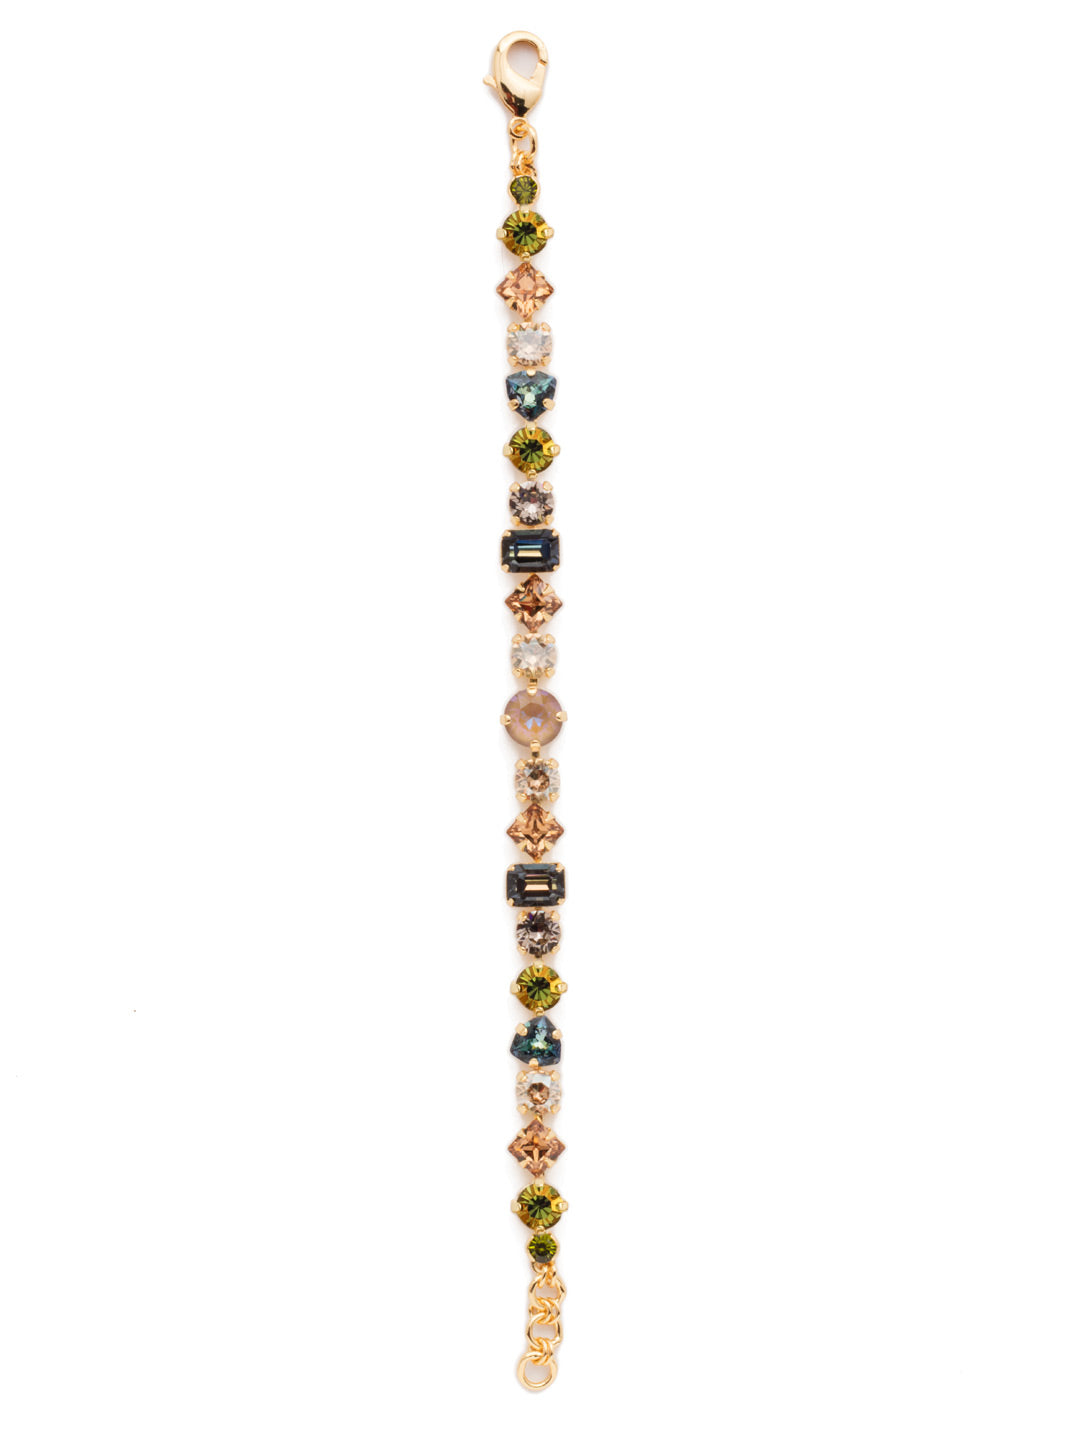 Sedge Tennis Bracelet - BDX1BGCSM - This fully encrusted line bracelet features a variety of stones in square, round, cushion antique, triangle antique, and baguette shapes. From Sorrelli's Cashmere collection in our Bright Gold-tone finish.